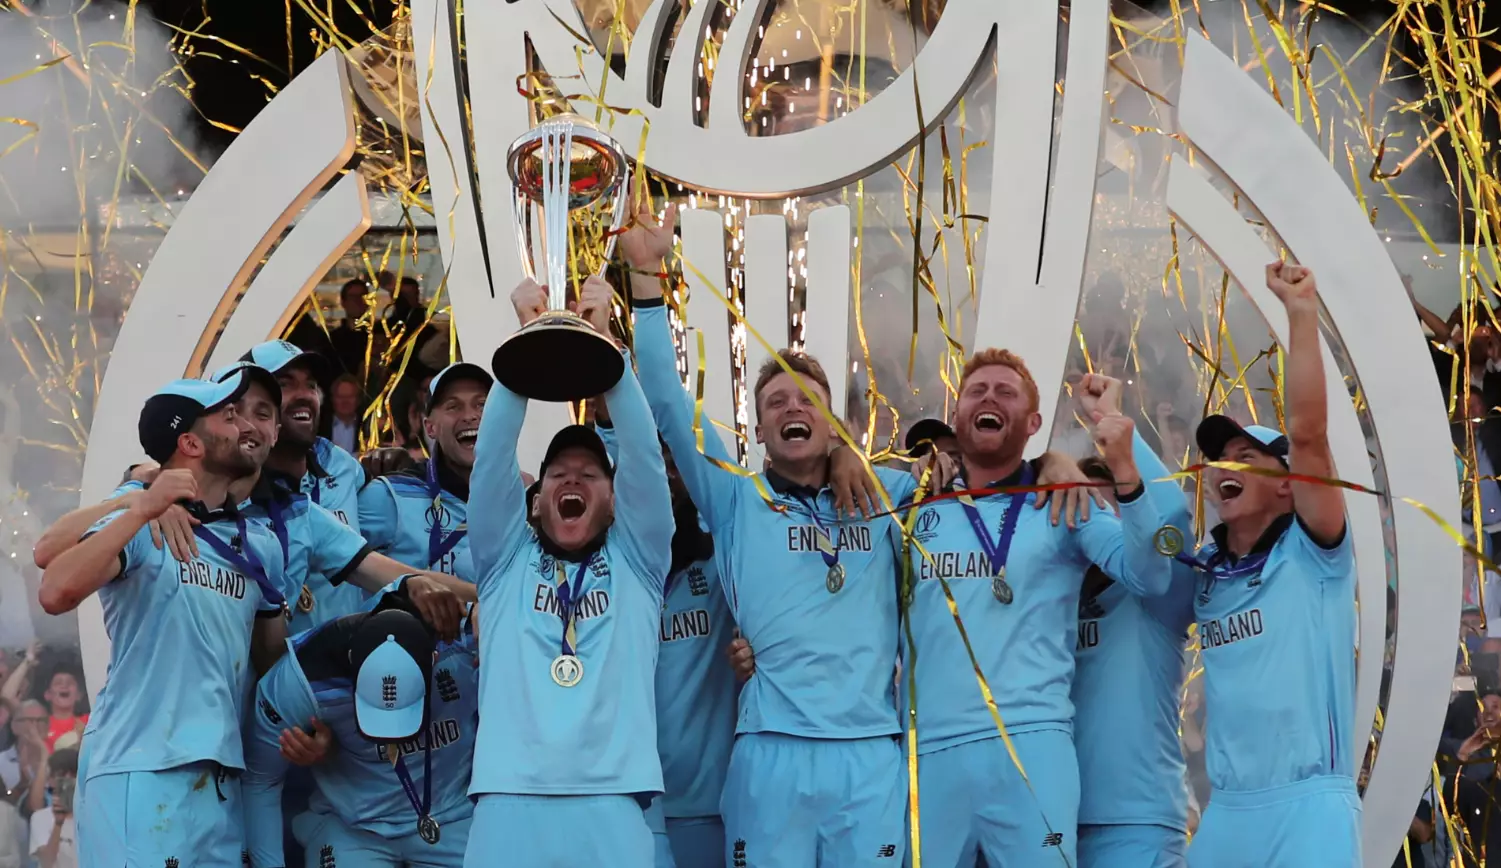 England's captain Eoin Morgan lifts the trophy after winning the Cricket World Cup final match.